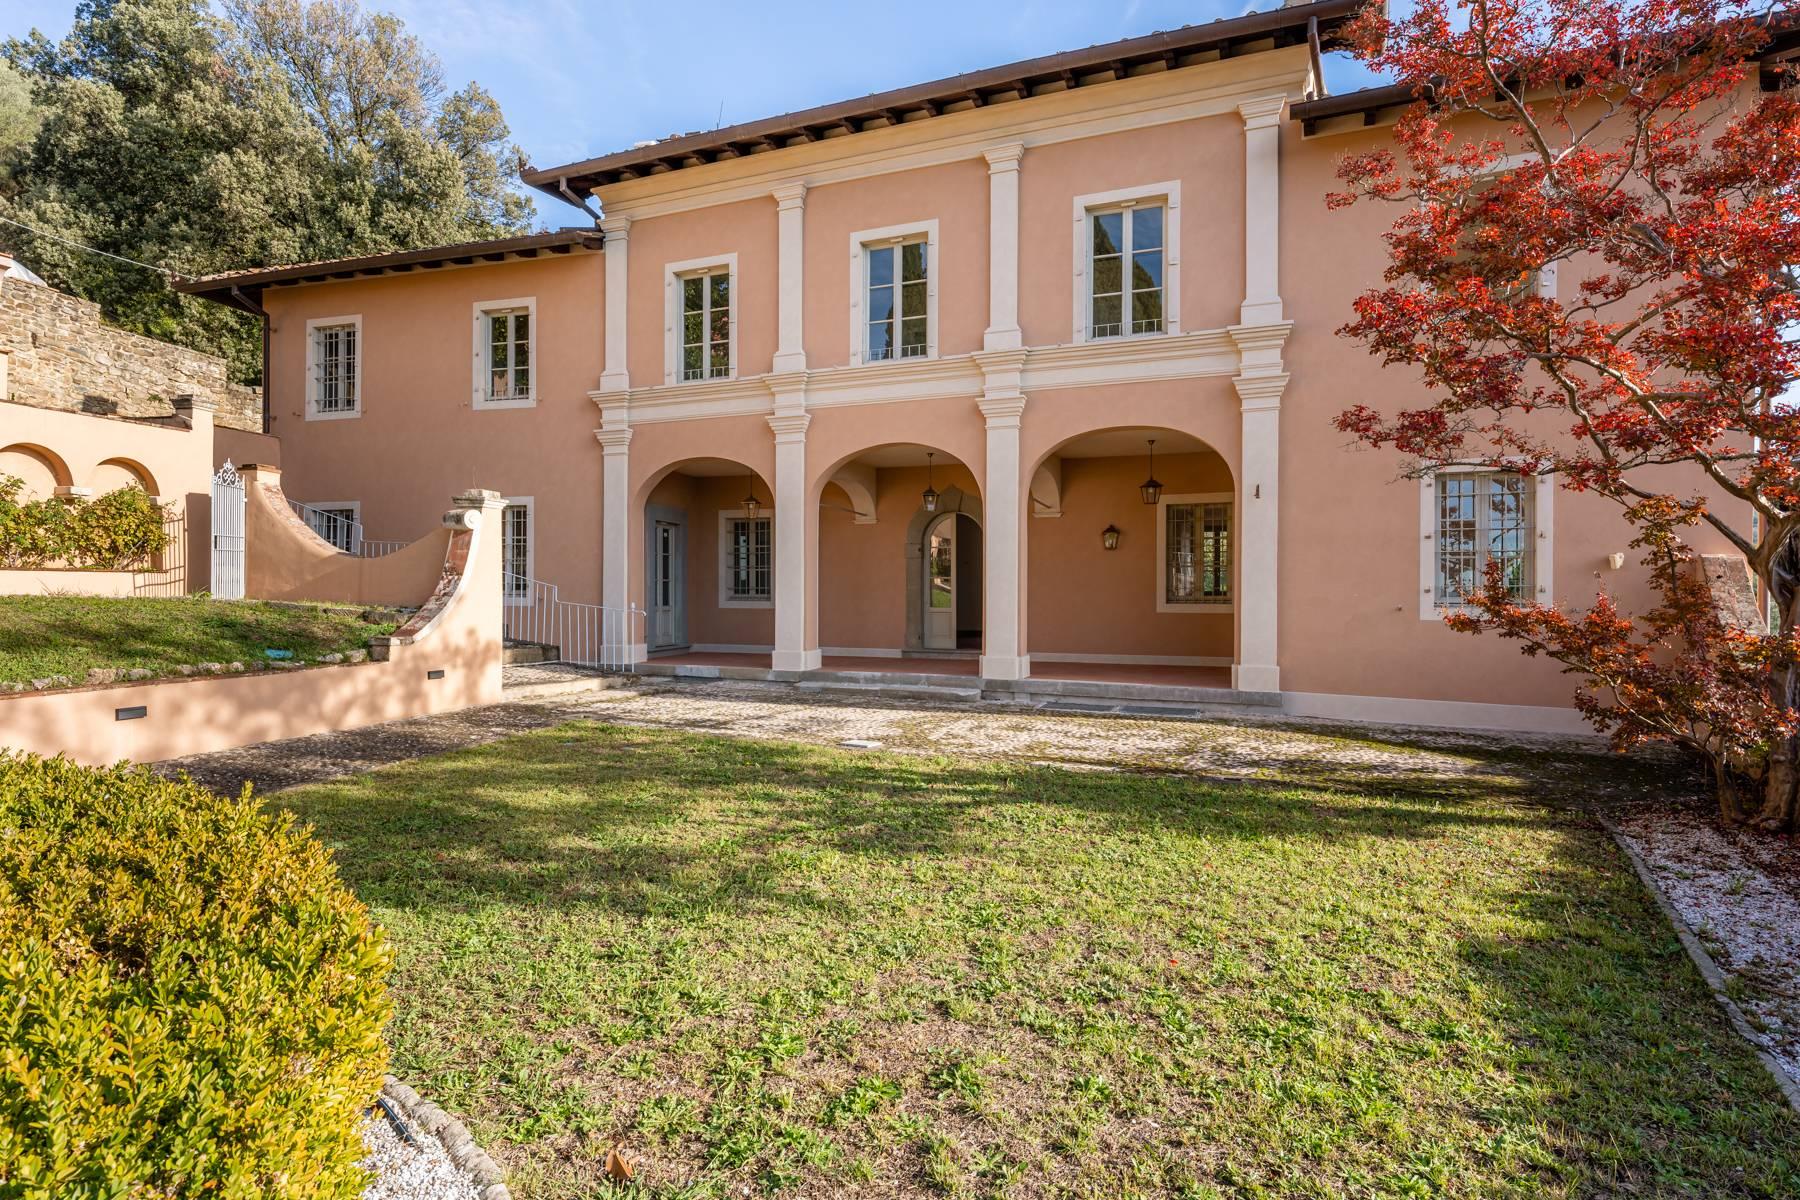 Historic Villa with Chapel on the hills of Pescia - 2